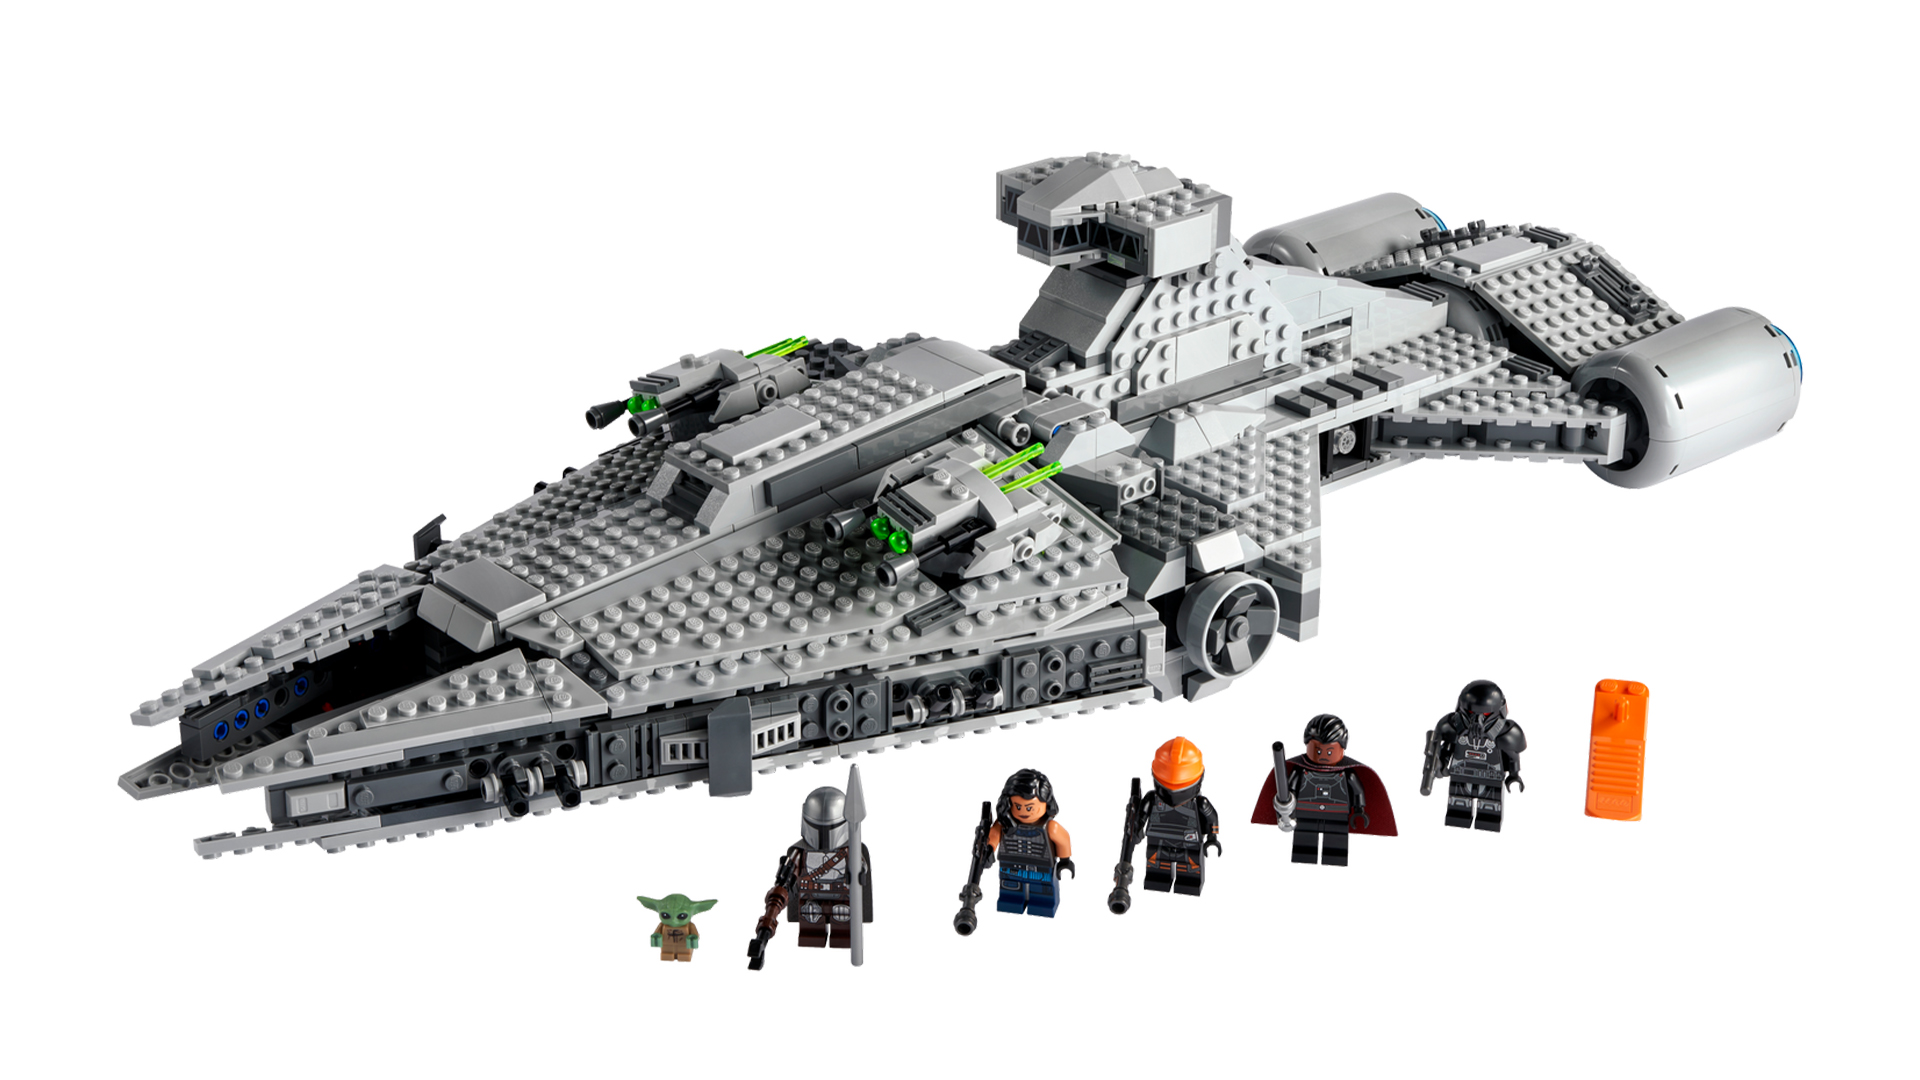 Lego Star Wars Imperial Light Cruiser_The LEGO Group